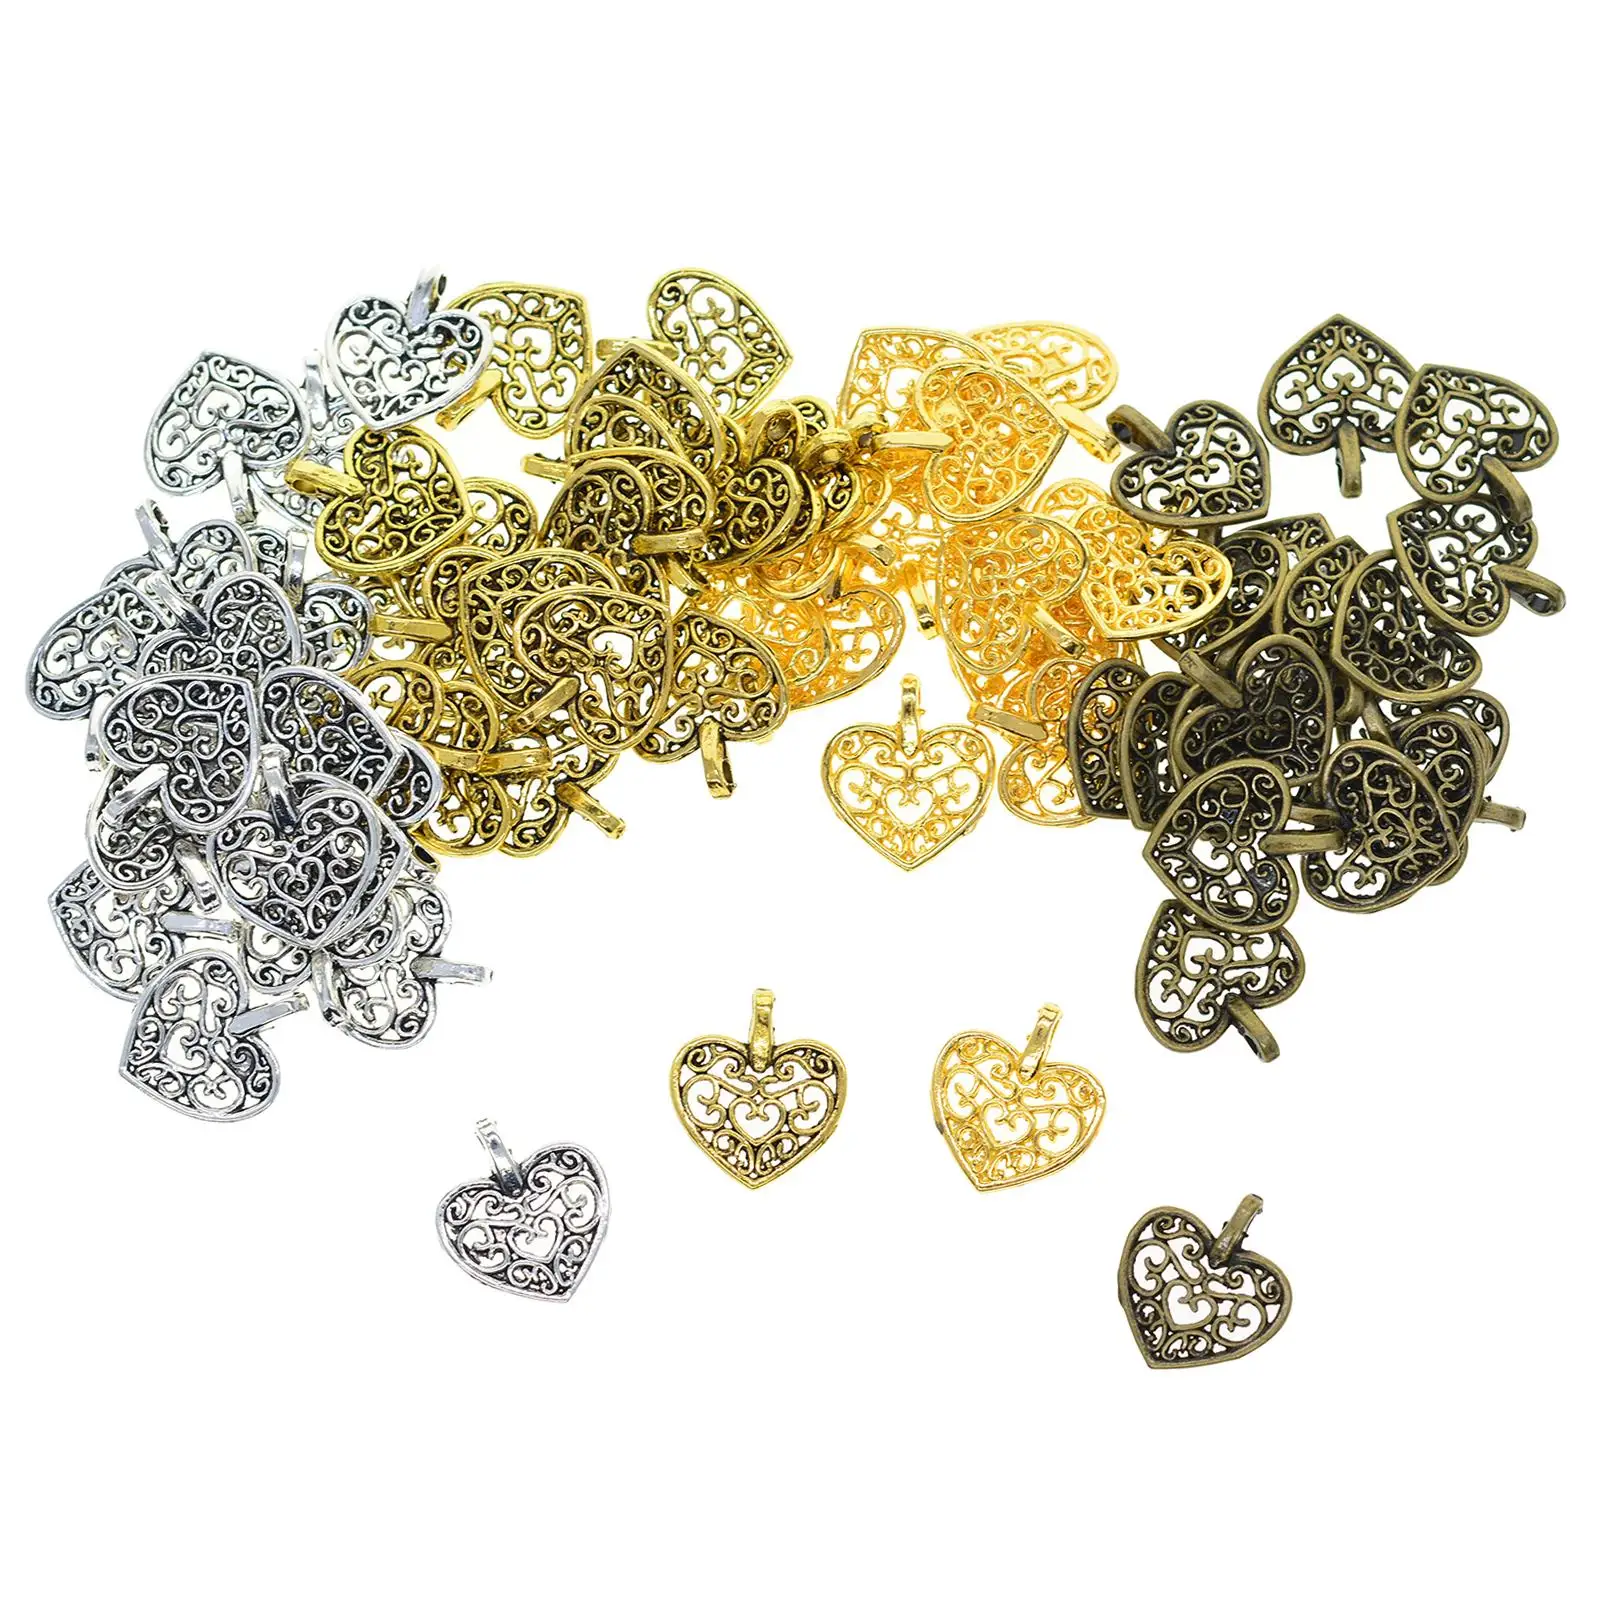 120x  Shaped Charms 4 Colors Findings Tiny Dangle Pendants for Jewelry Making Bracelet DIY Keychains Crafts Supplies